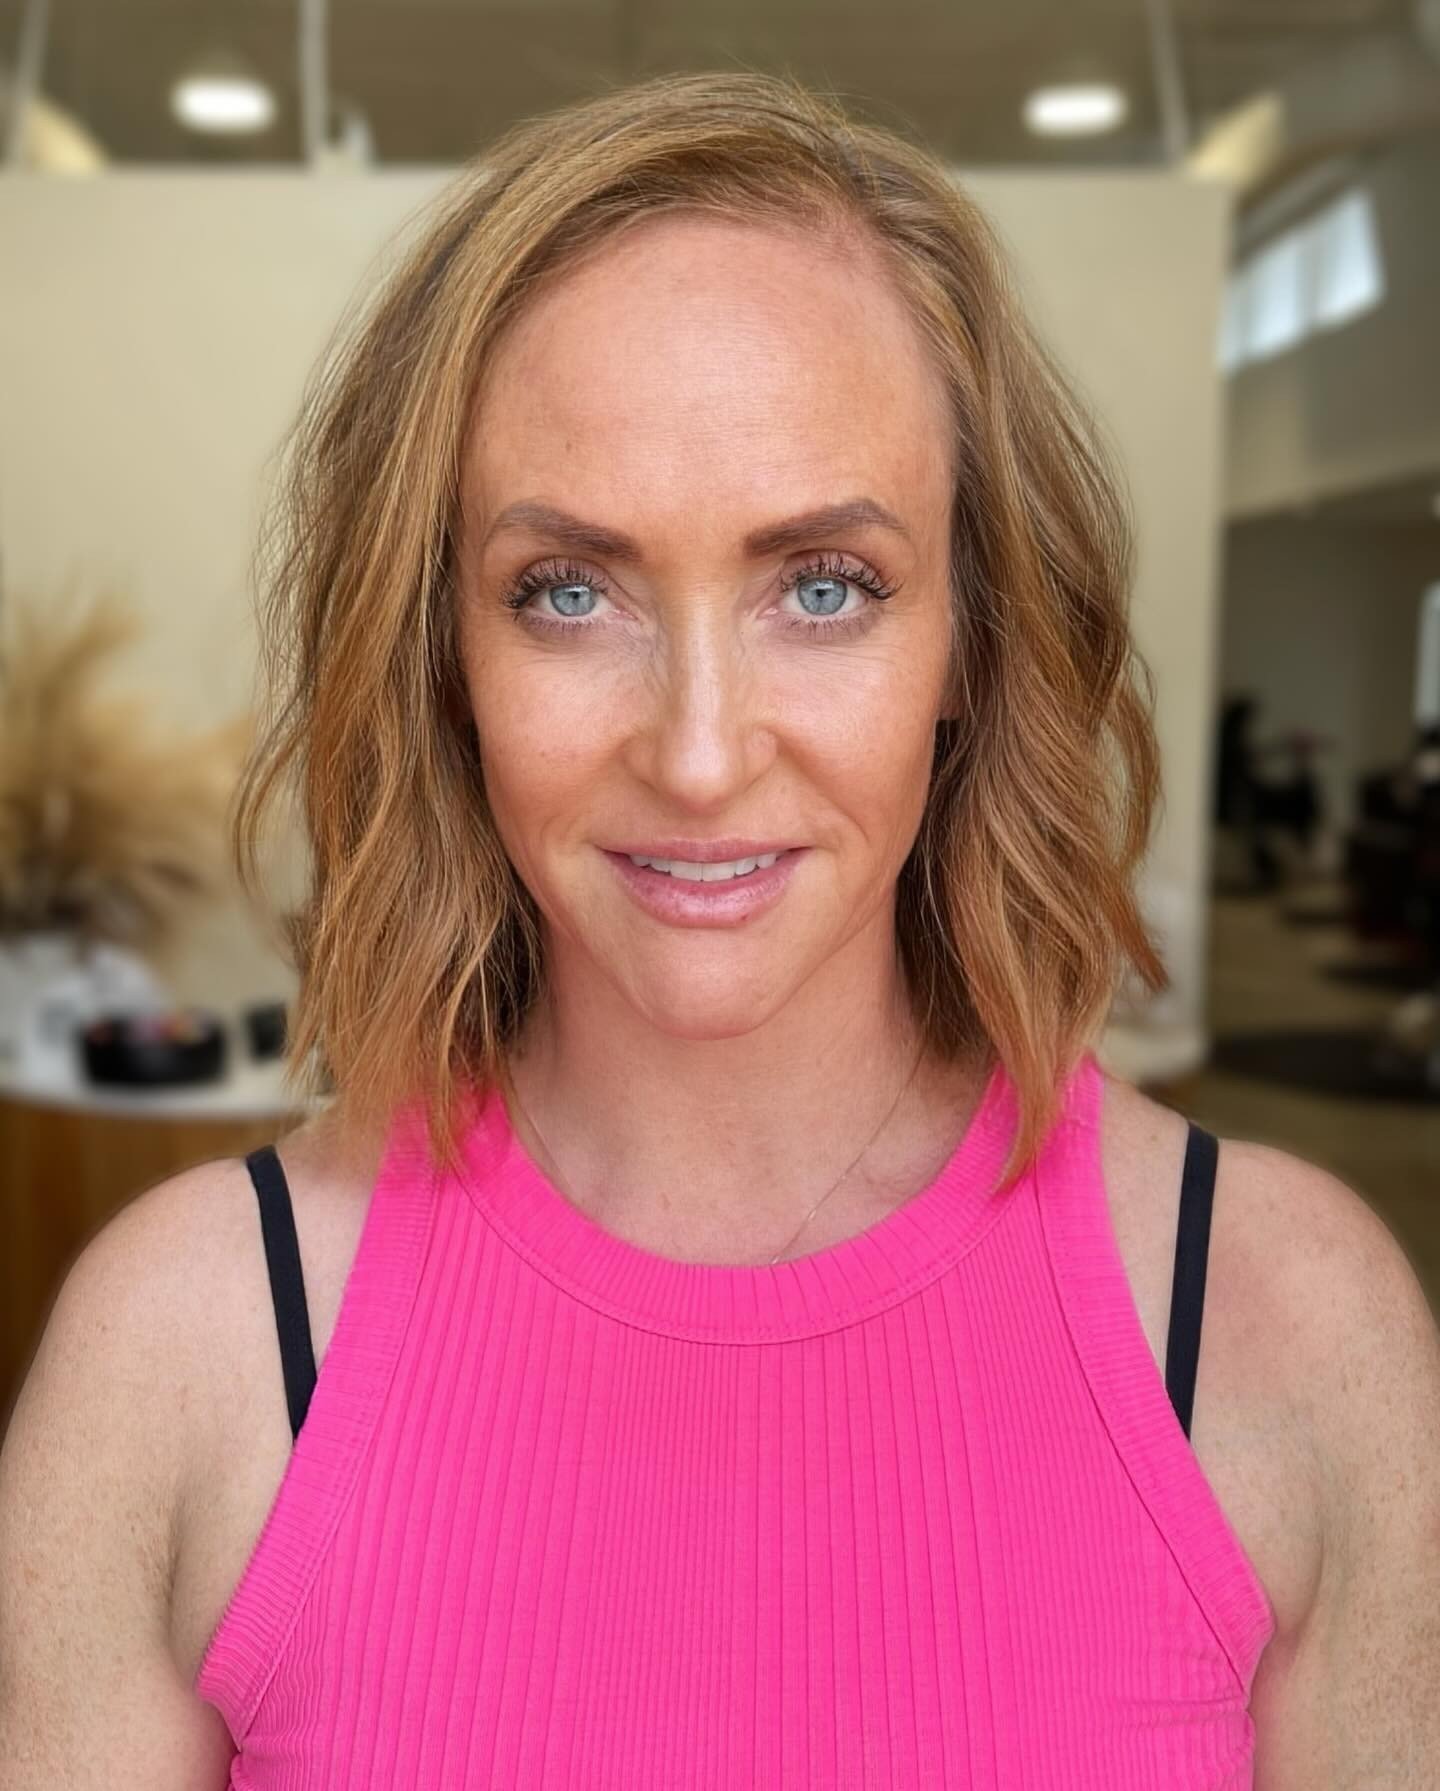 Chop Chop ✂️⁠
⁠
How cute is this short hair on @ginger_bosslady?! ✨⁠ @bleachellaa_ did a fun little chop + added 1 row of @maneandstitch extensions for some added volume.⁠
⁠
Extensions can benefit any hairstyle! Visit mane-tained.com to book a consul